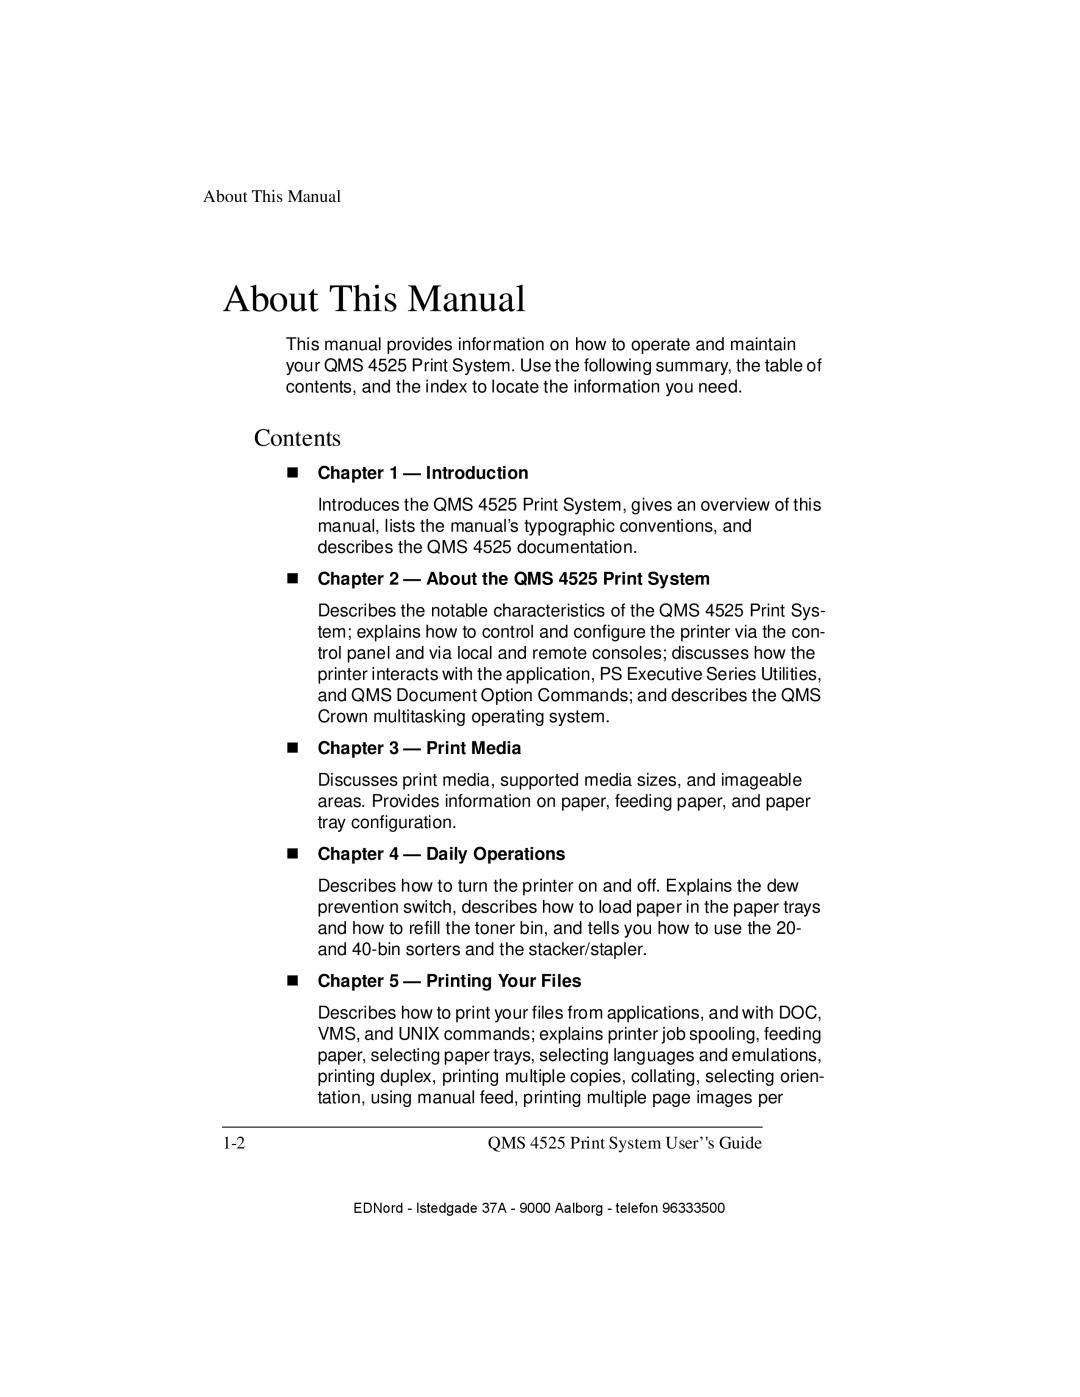 IBM QMS 4525 manual About This Manual, Contents 